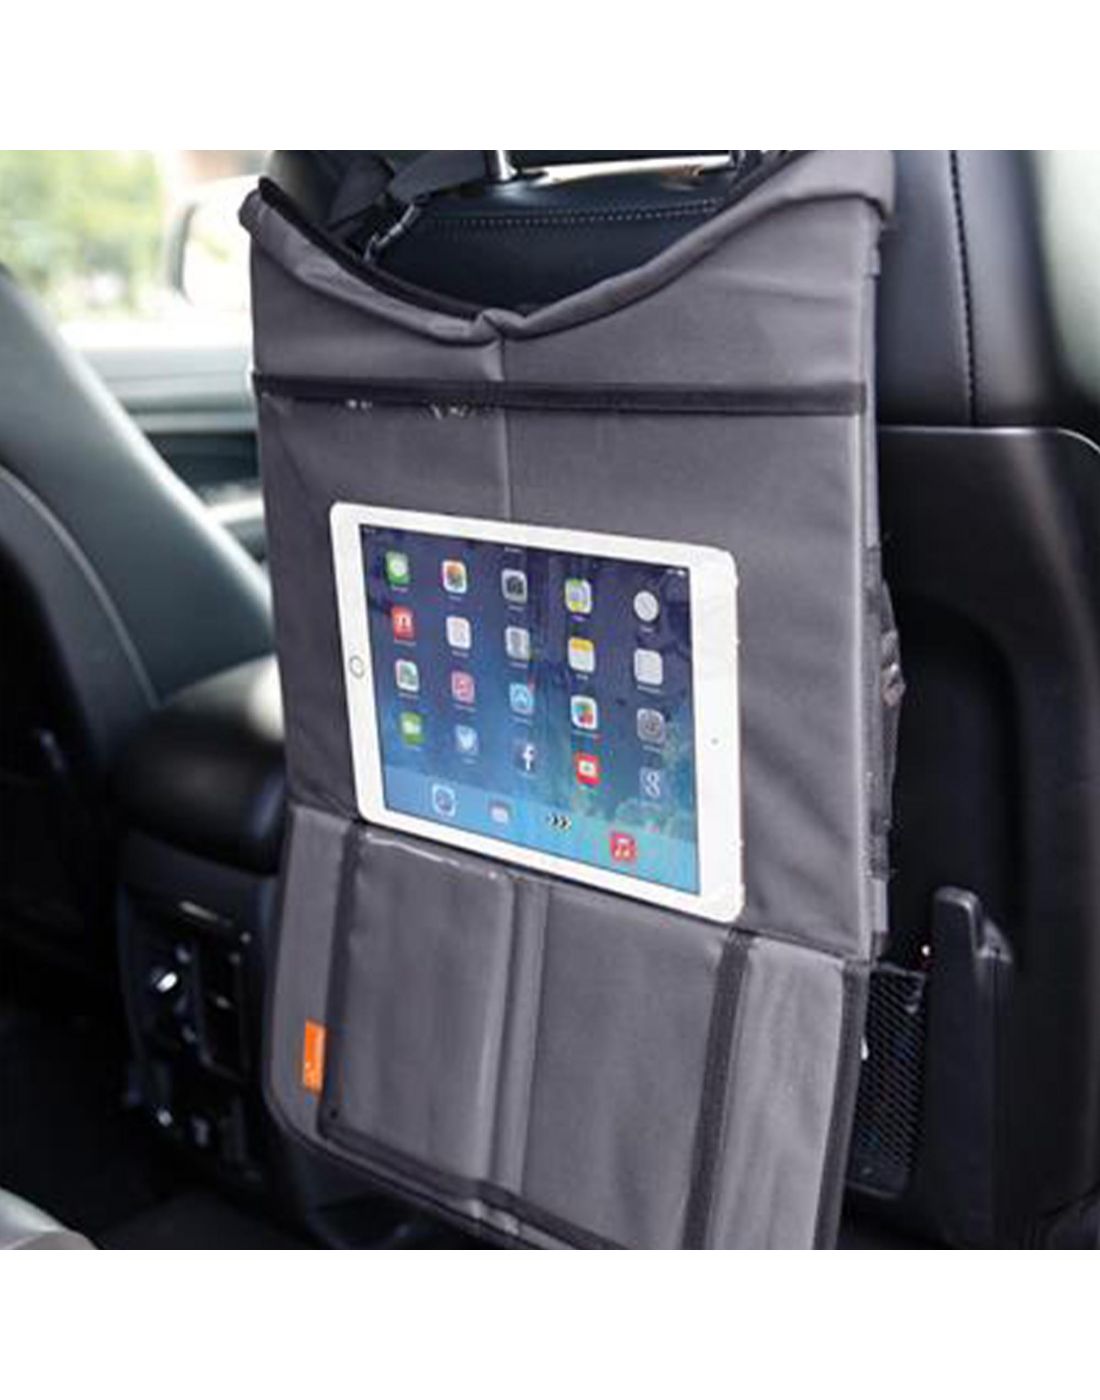 Dreambaby Travel pad incl. tablet holder